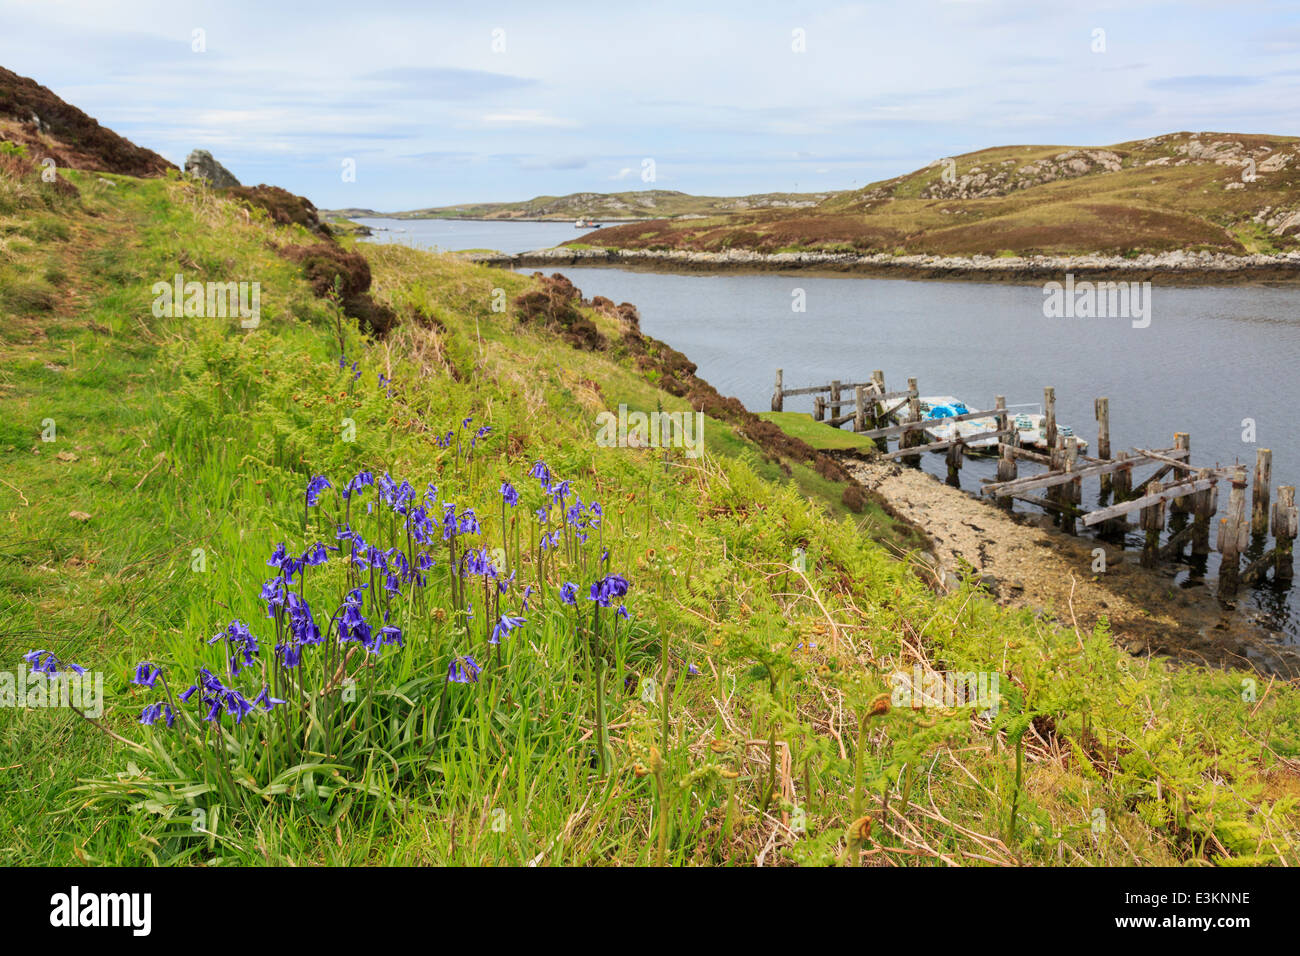 Coastal scene with Bluebells growing on coast by Loch Sgioport, South Uist, Outer Hebrides, Western Isles, Scotland, UK, Britain Stock Photo